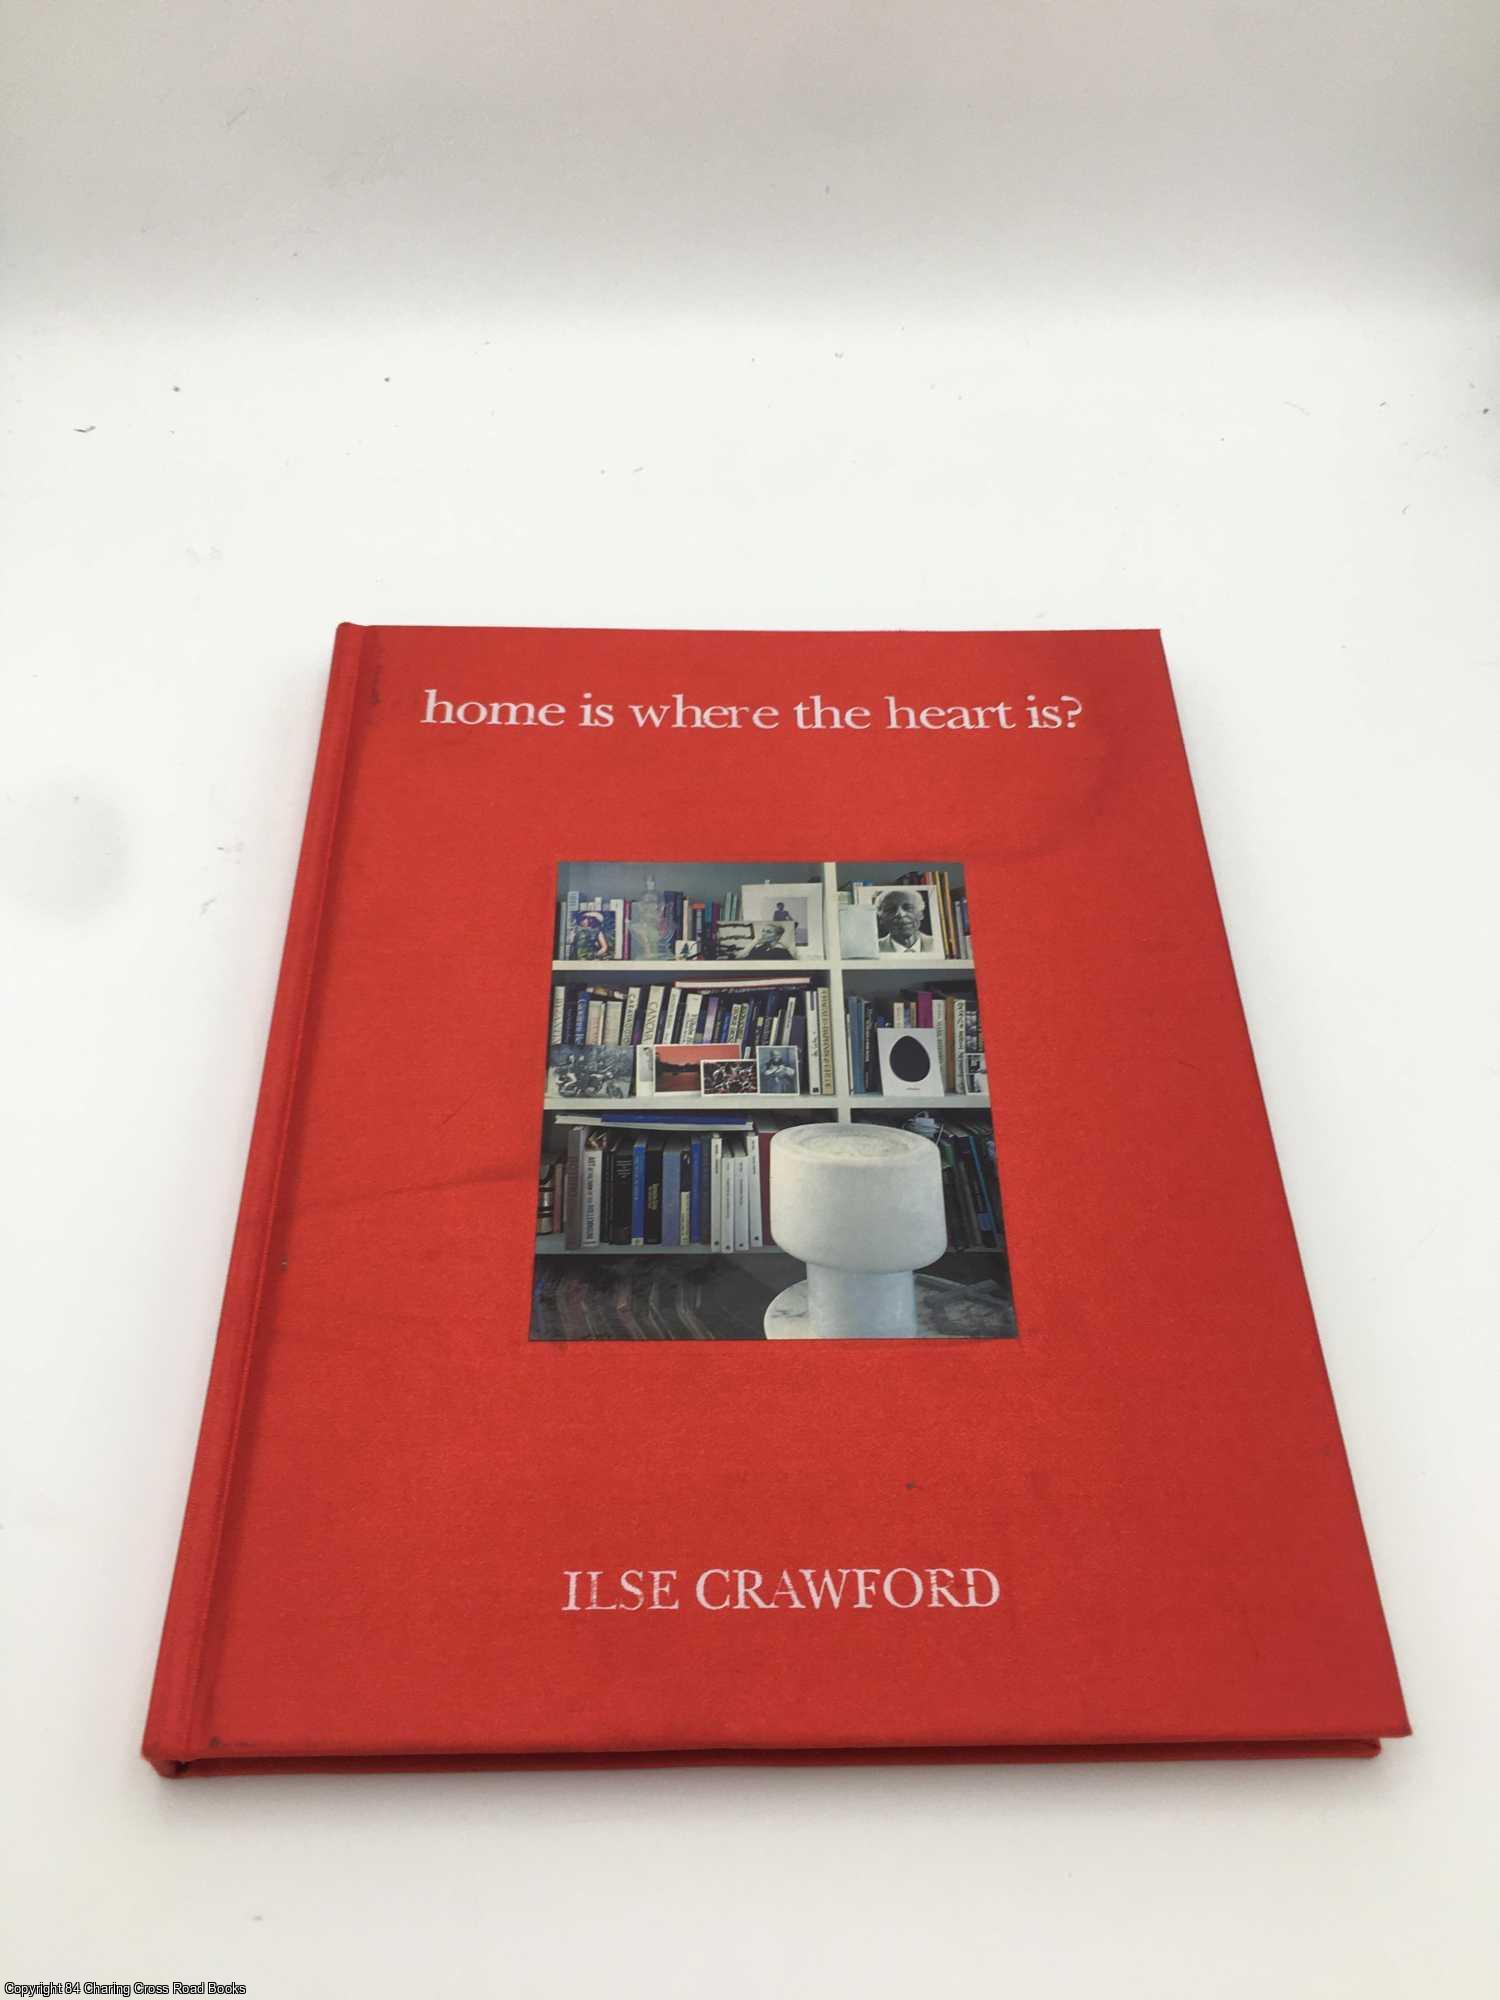 Home is Where the Heart is by Ilse Crawford on 84 Charing Cross Rare Books